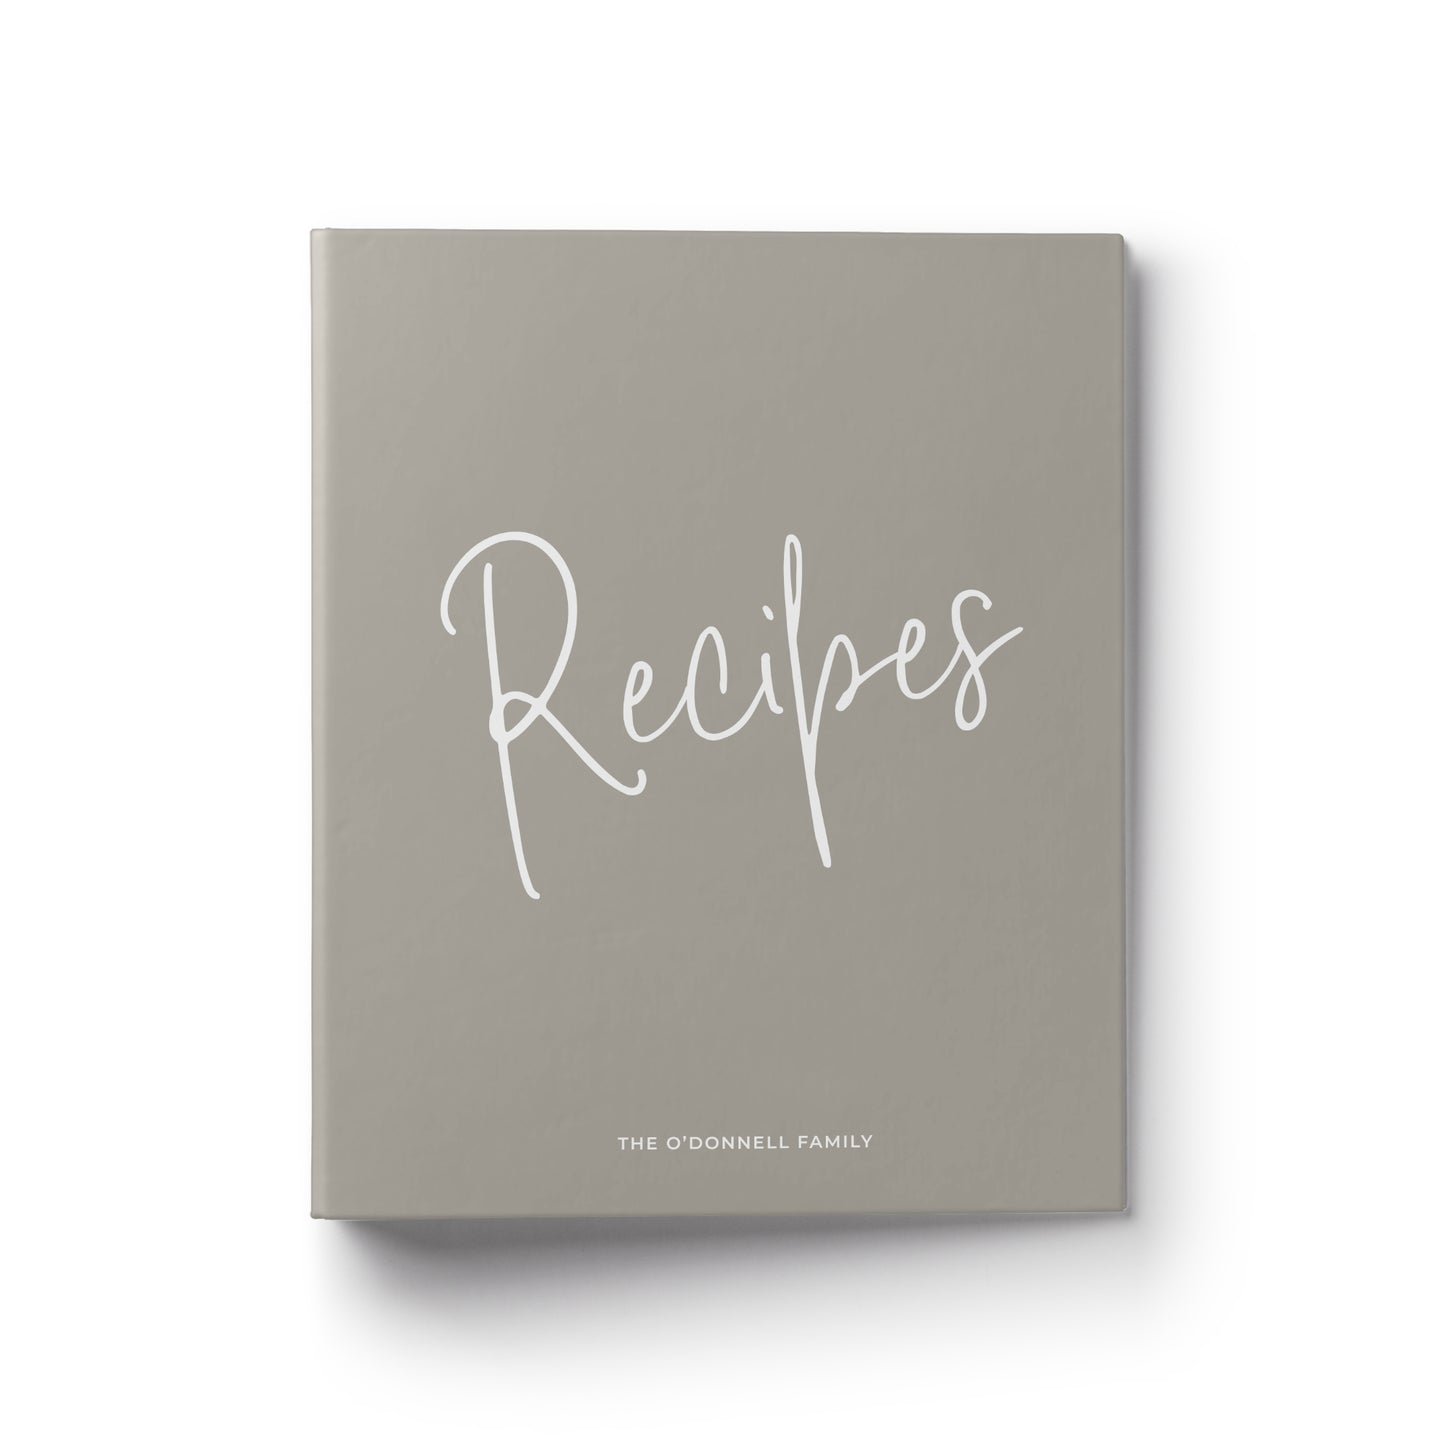 A calligraphy custom recipe binder makes the perfect gift for any occasion